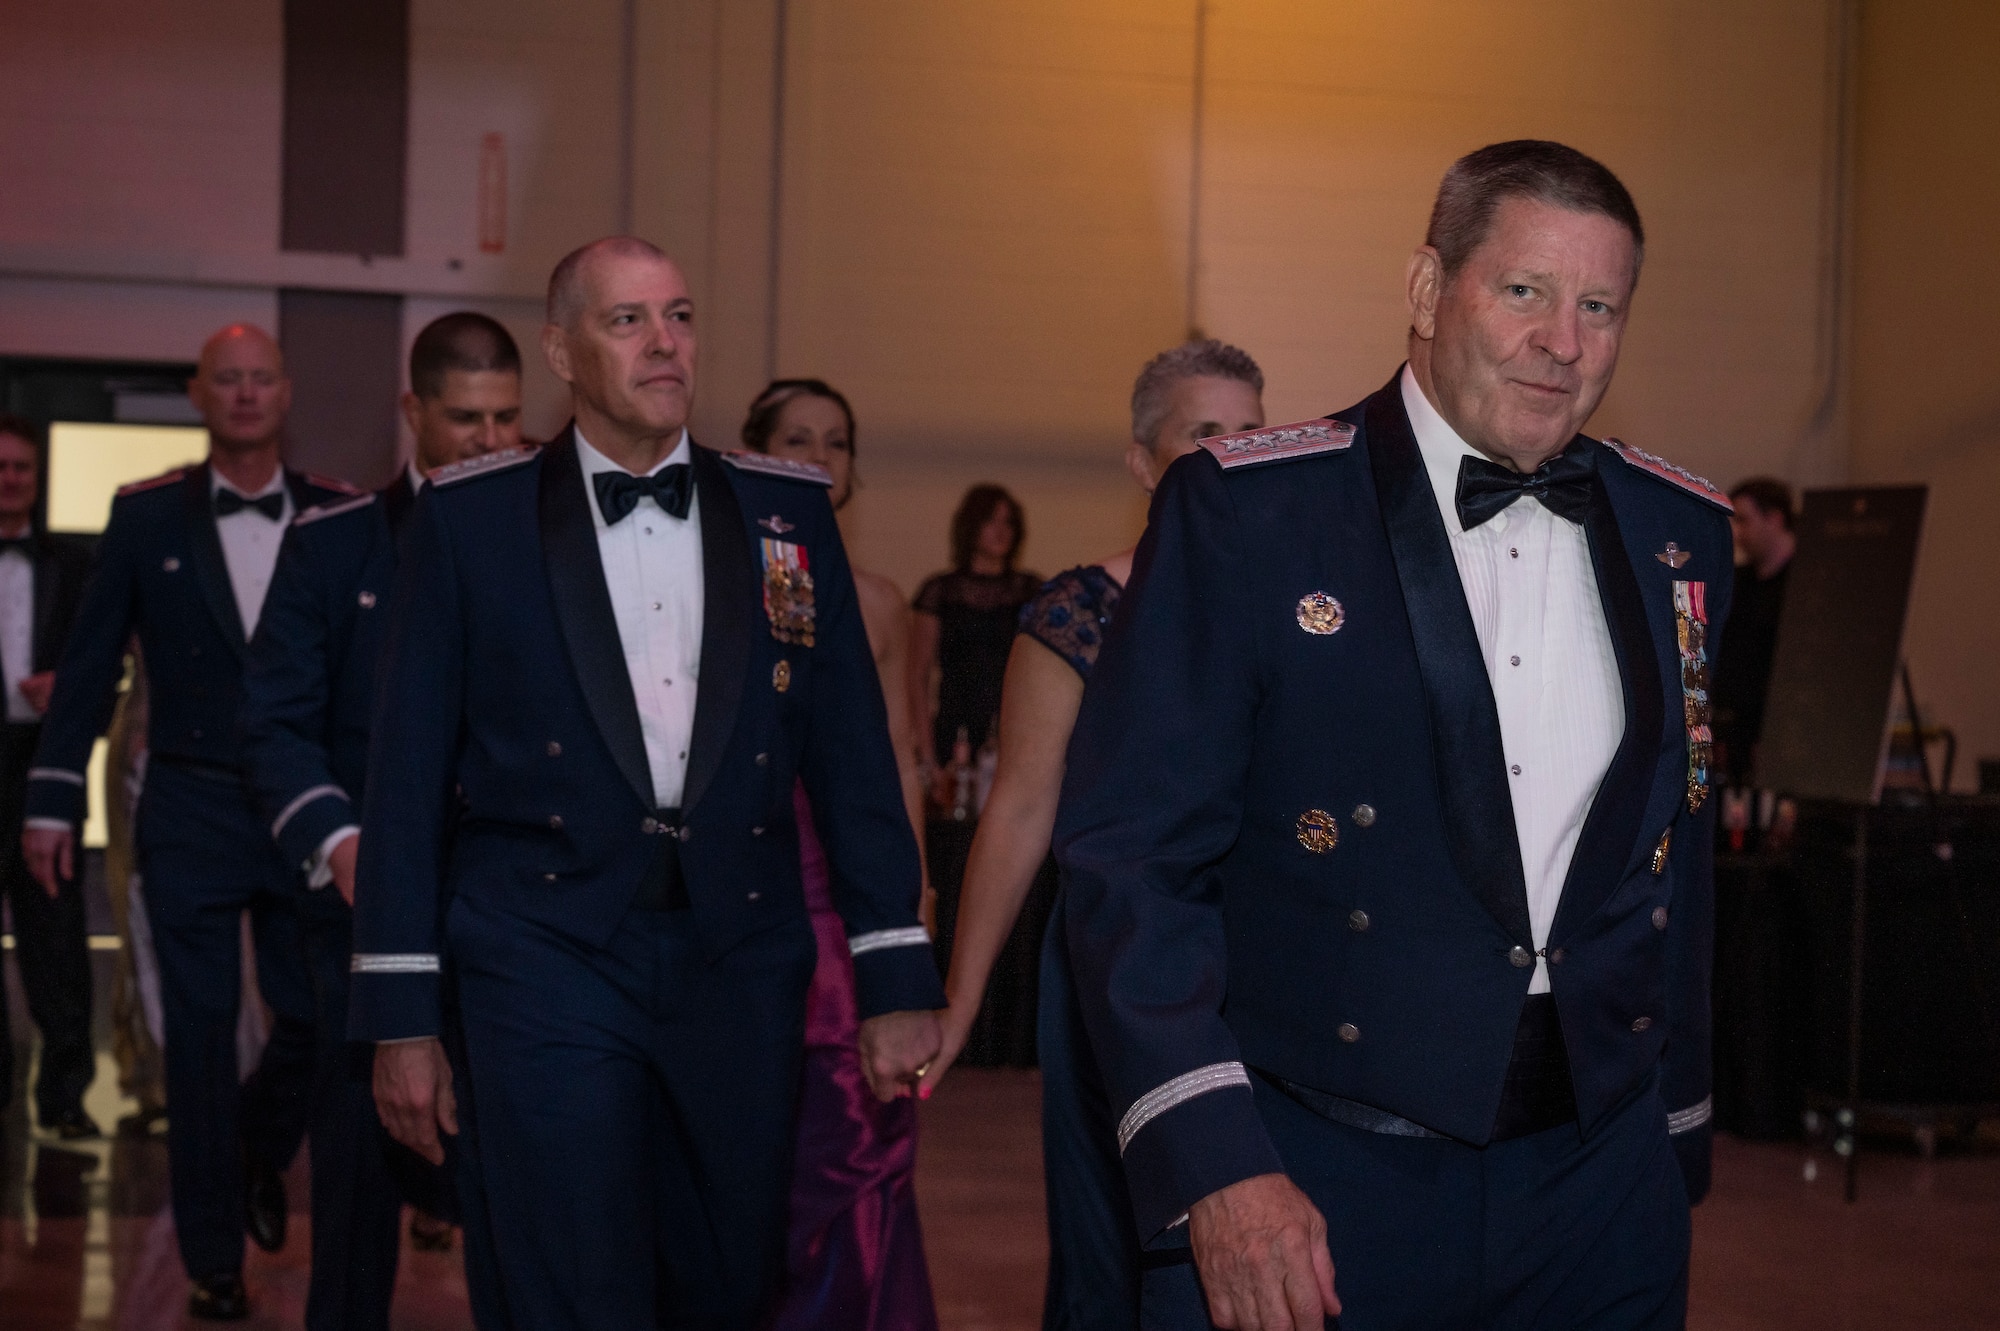 The Dyess Air Force Base and Air Force Global Strike leadership teams along with members of the Abilene Military Affairs Committee enter the Abilene MAC and Dyess Air Force Gala in Abilene, Texas, Aug. 26, 2023.  The event was held to celebrate the MAC’s 70th anniversary and the  Air Force’s 76th birthday. The Abilene MAC hosted the gala to honor Dyess Airmen and the legacy they have created at America’s only Lift and Strike Base.